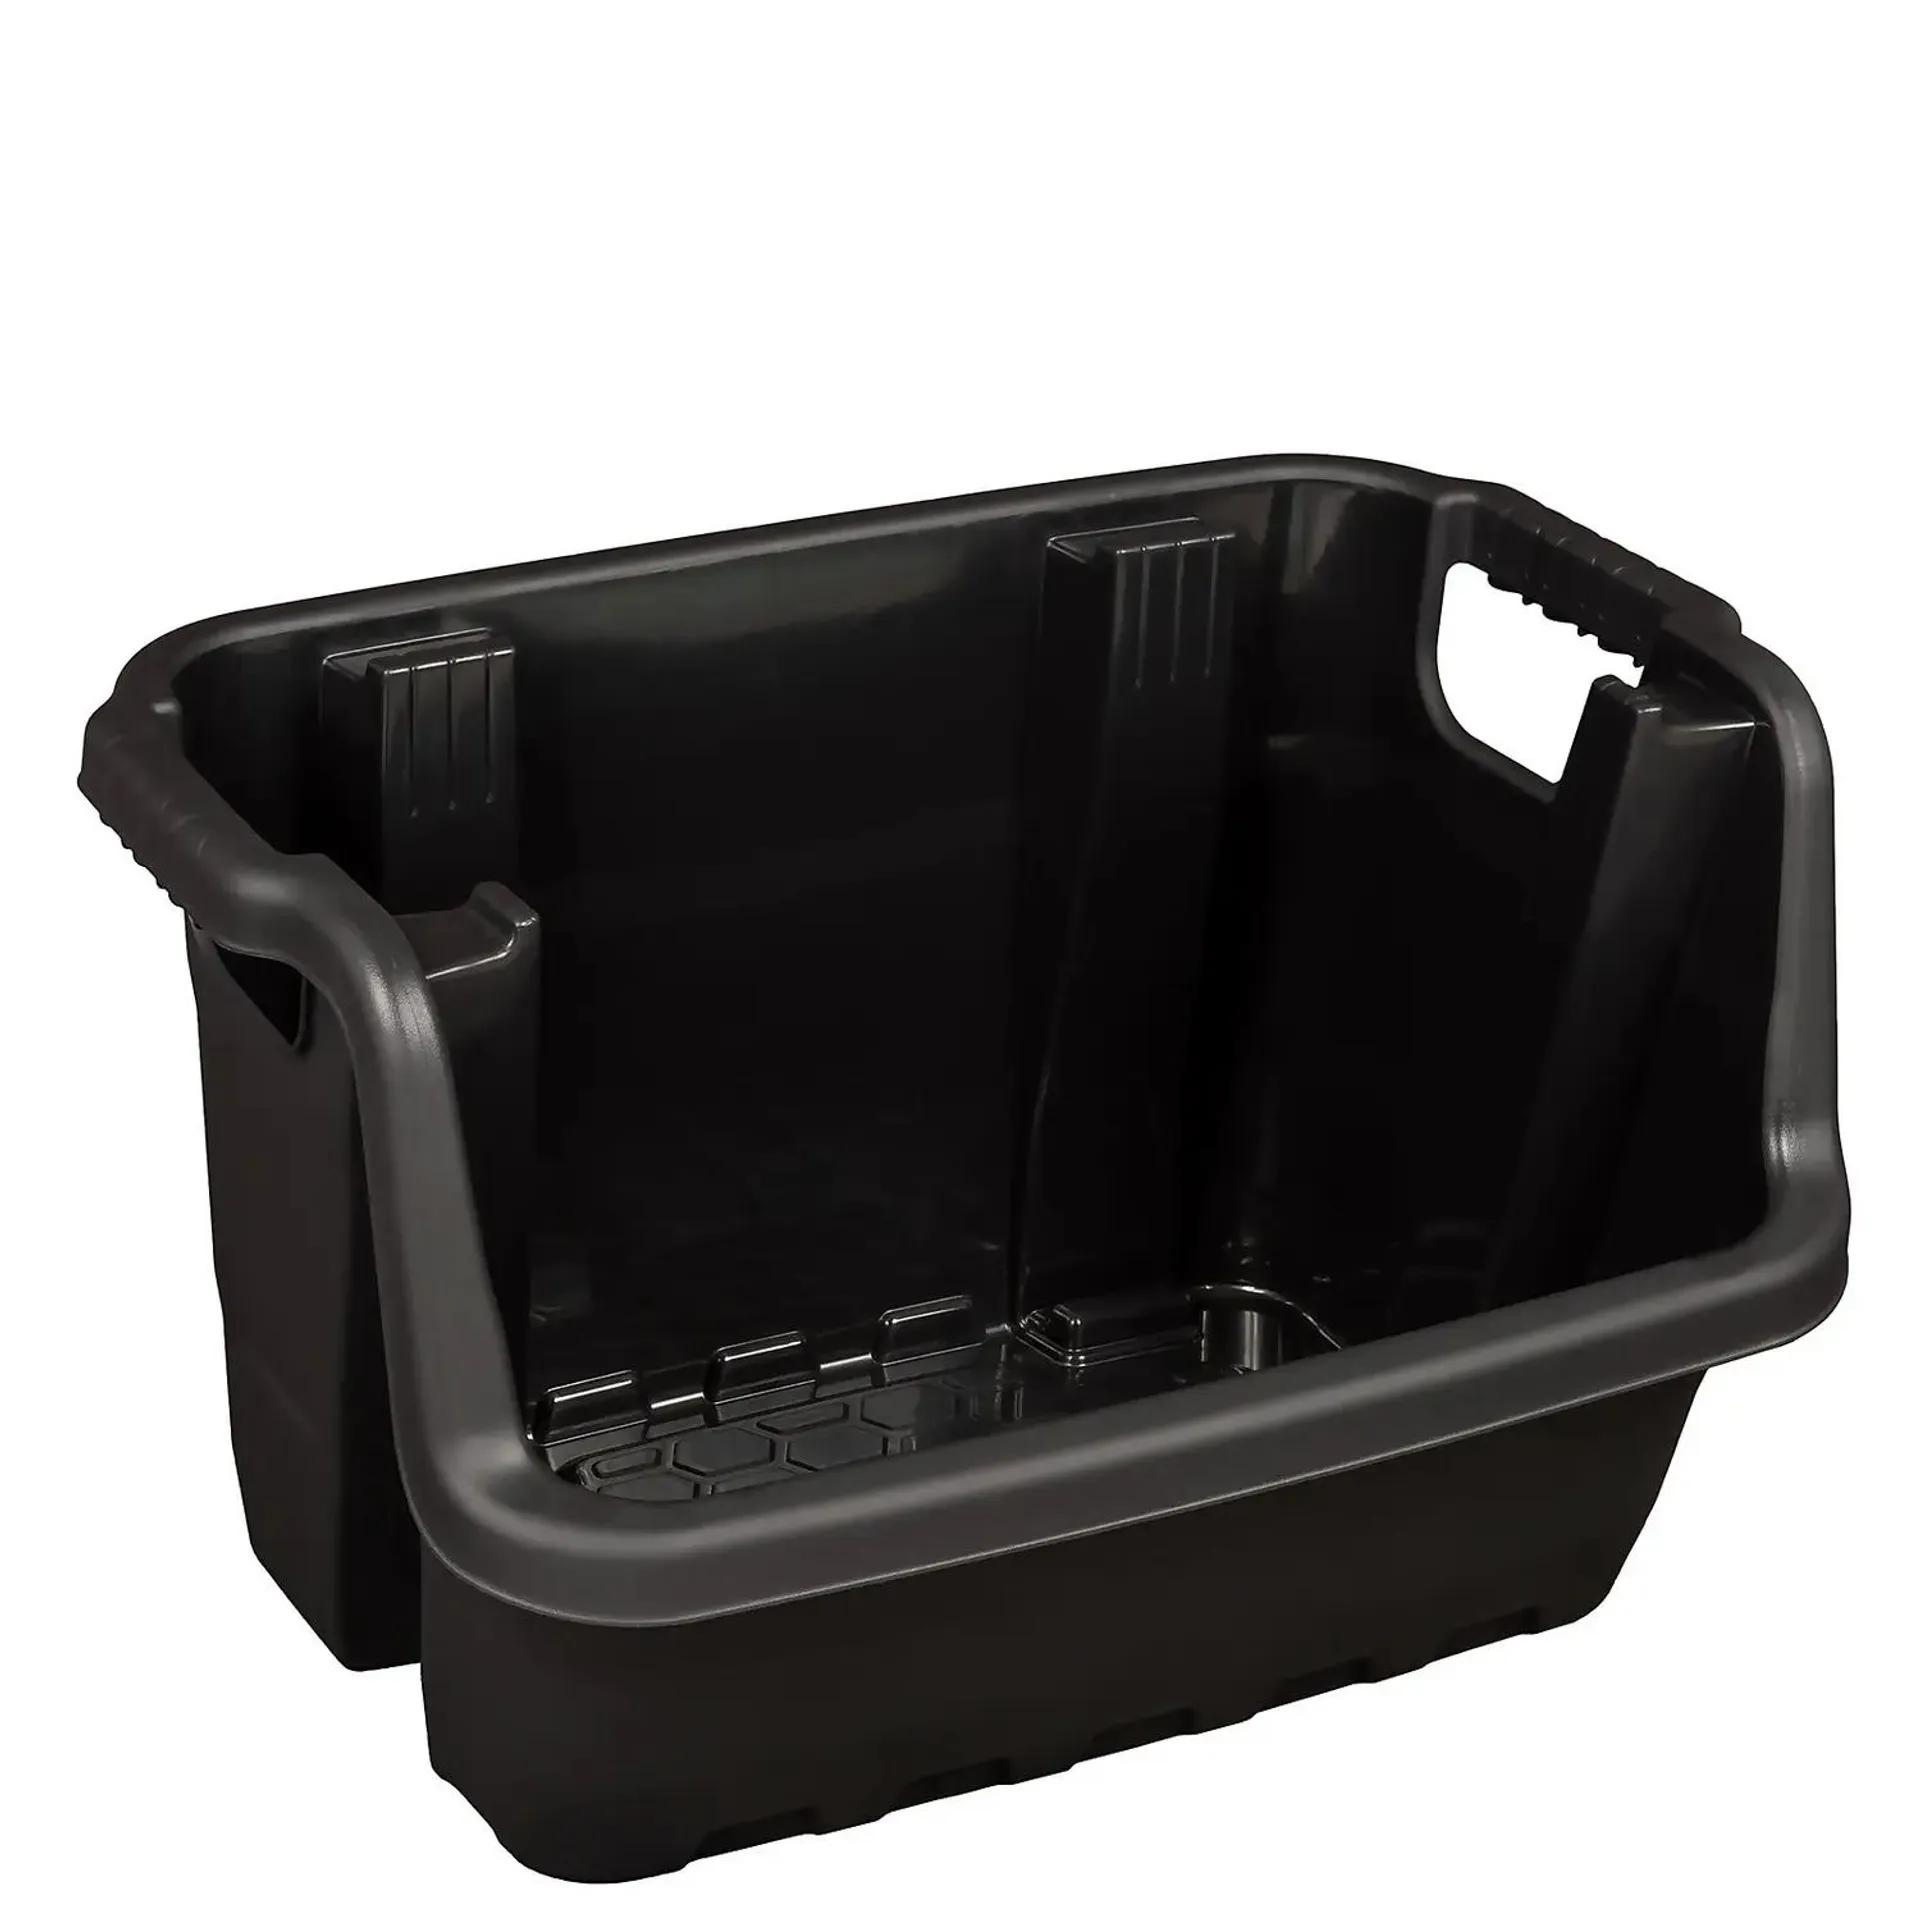 Strata Heavy Duty Stacking Crate - Black